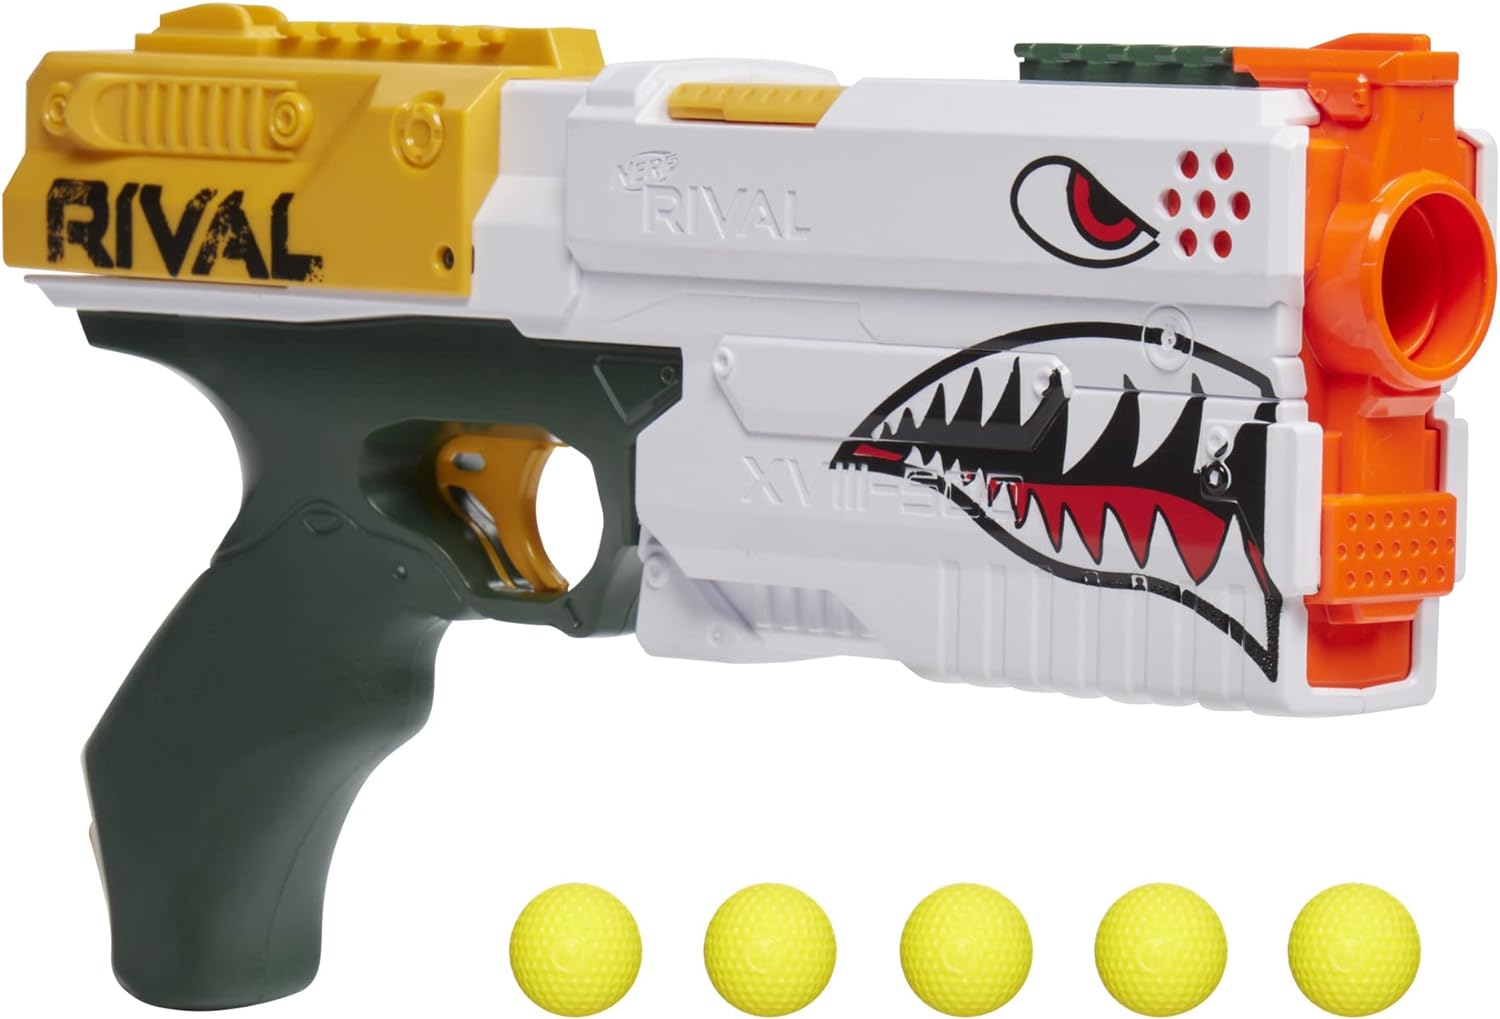 Nerf Rival Kronos XVIII-500 Blaster, Breech-Load, 5 Nerf Rival Rounds, Spring Action, 90 FPS Velocity, White Color Design, Ages 14+ (Amazon Exclusive)